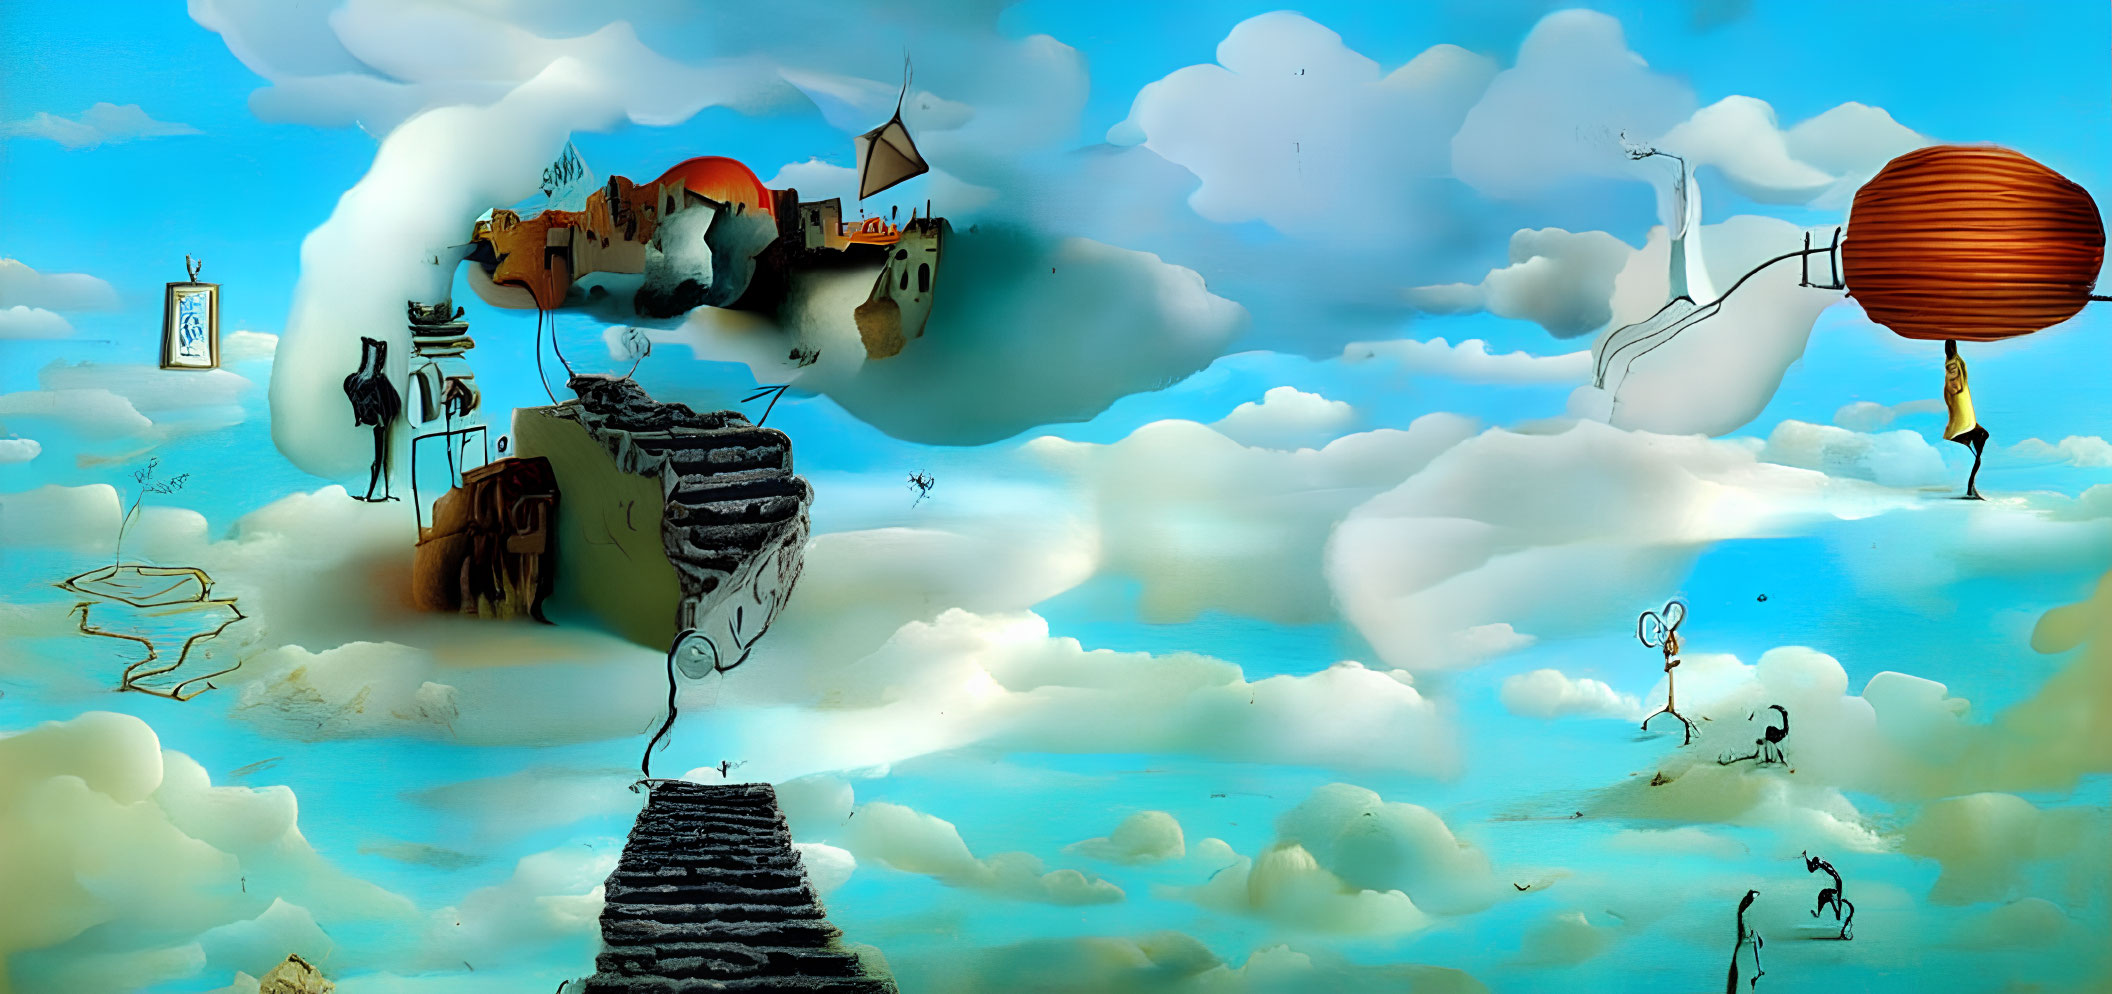 Surreal sky landscape with floating islands and grand balloon